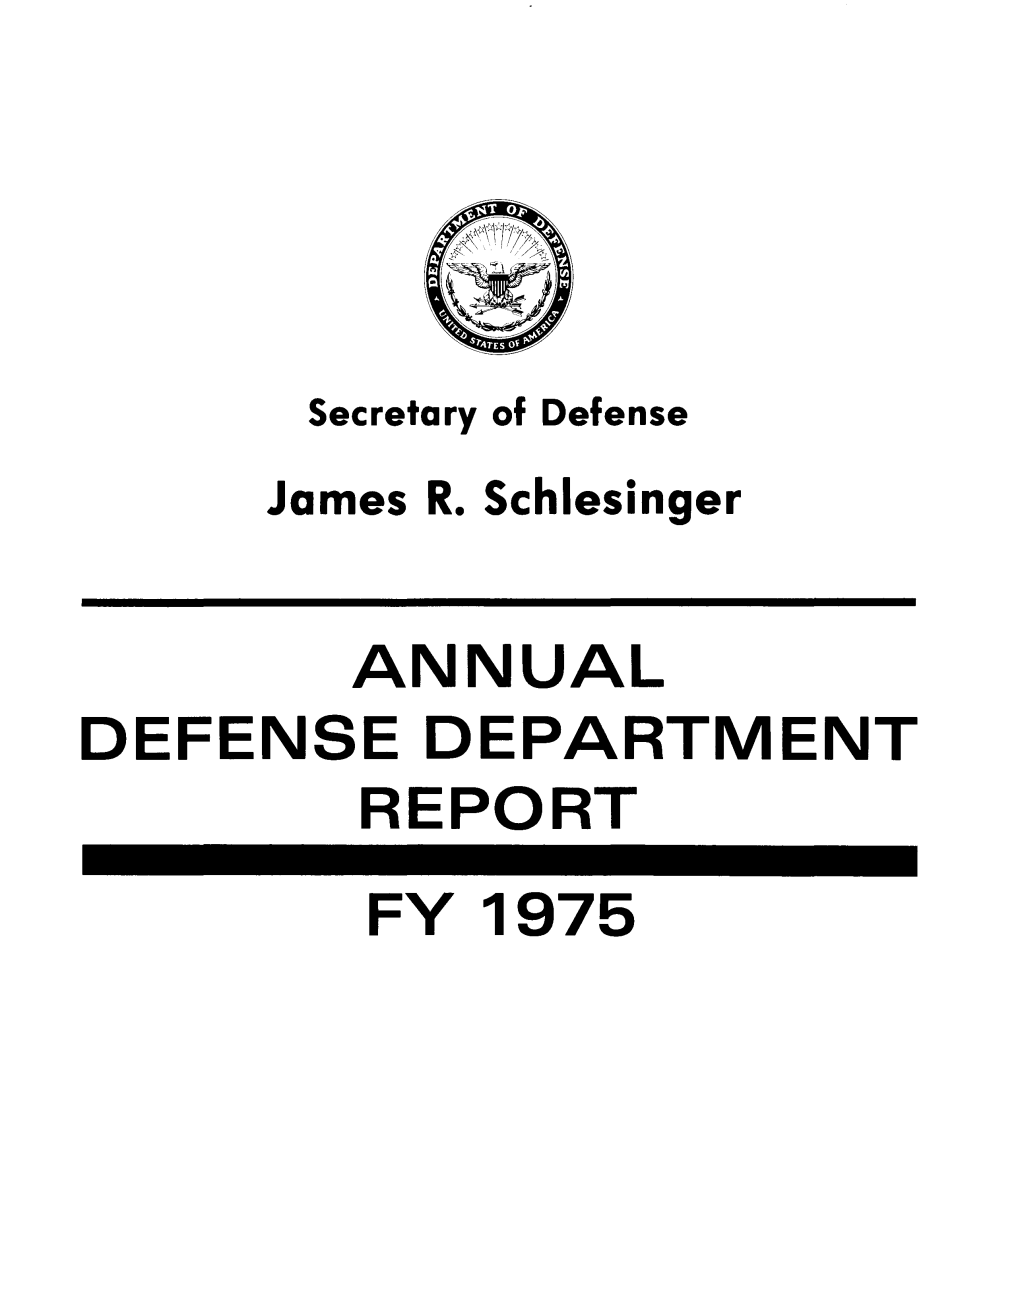 ANNUAL DEFENSE DEPARTMENT REPORT FY 1975 for Official Use Only Until Release on March 4, 1974